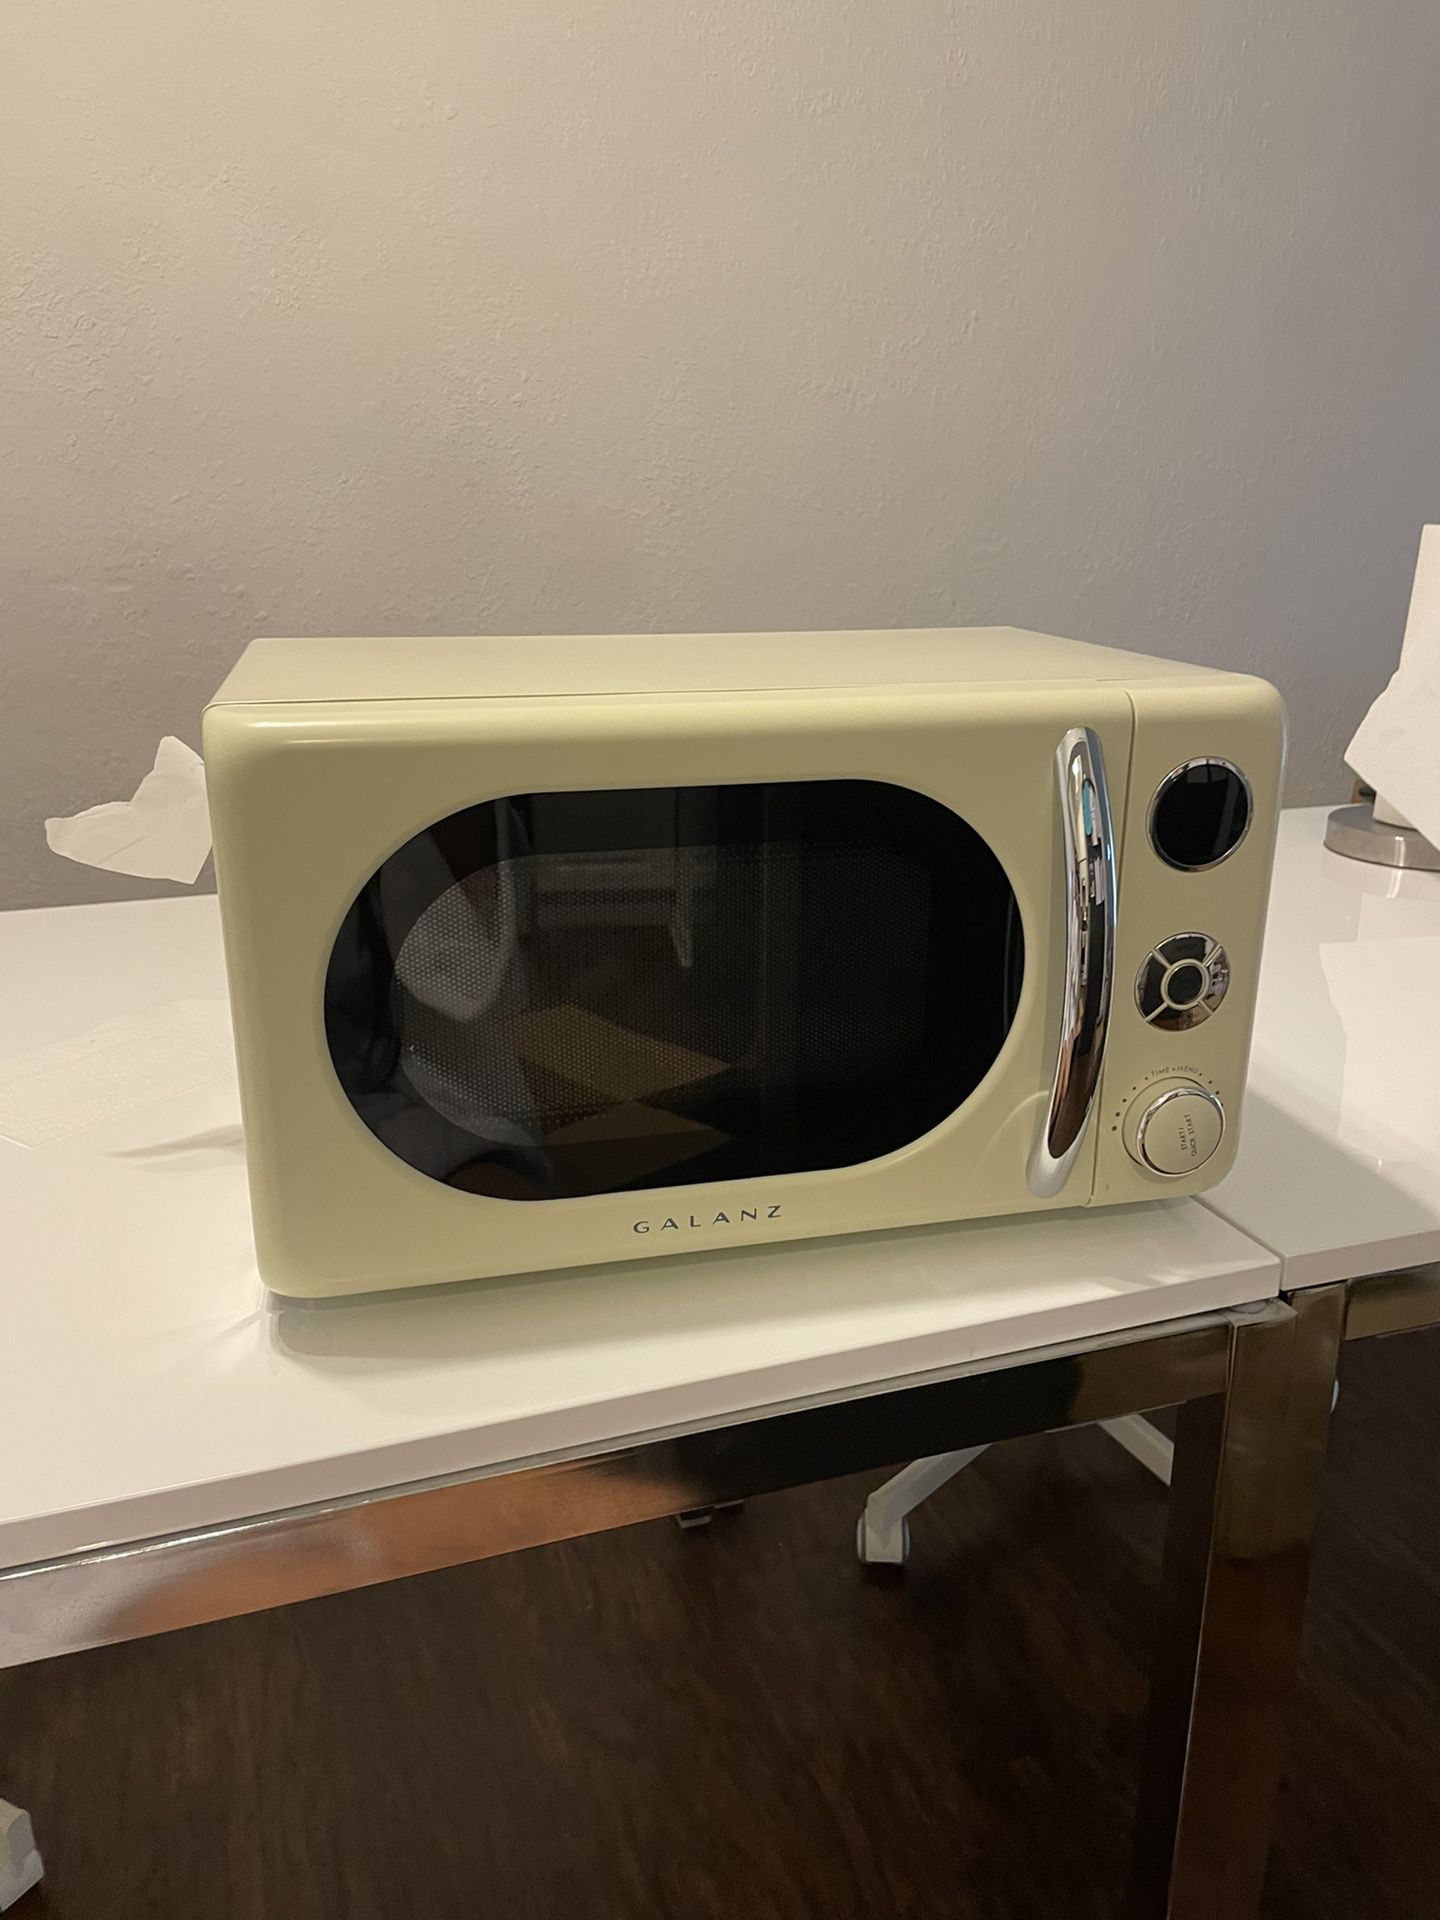 Galanz 0.7 Cu. Ft. Retro CounterTop Microwave Oven 700 Watts for